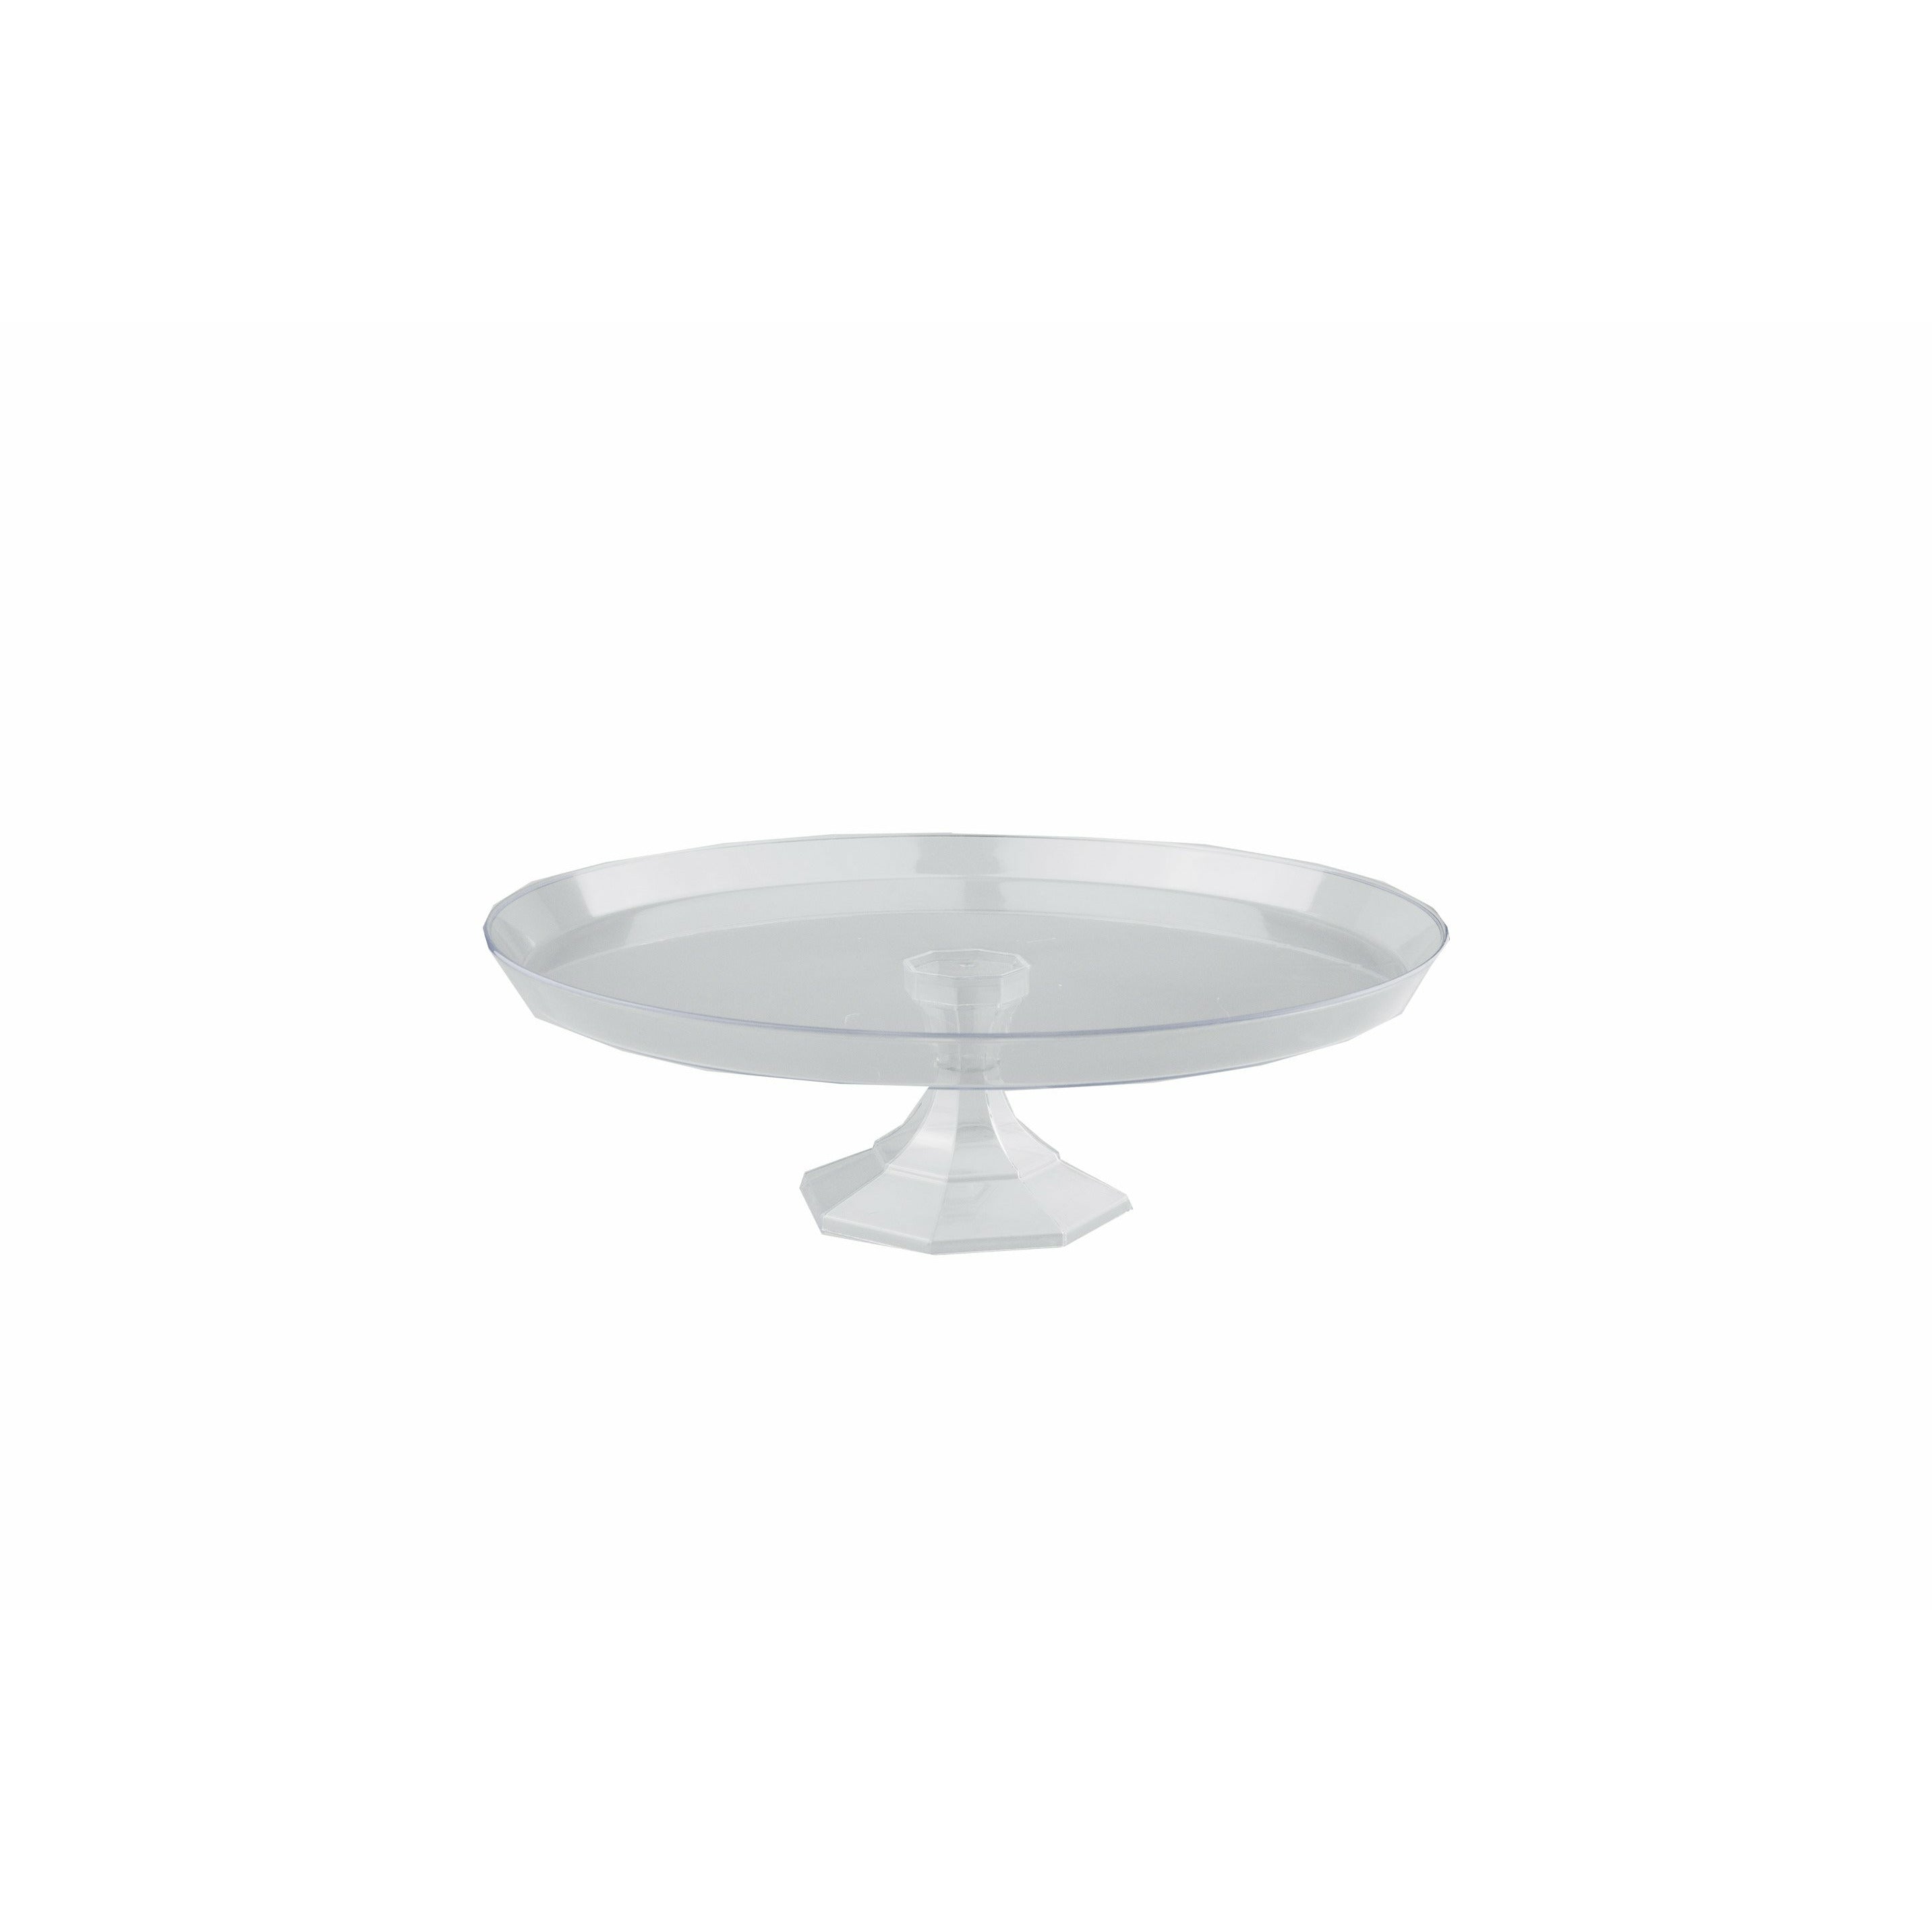 Partyware Signature Clear Cake Stand - 1 Pack 29.5cm Default Title